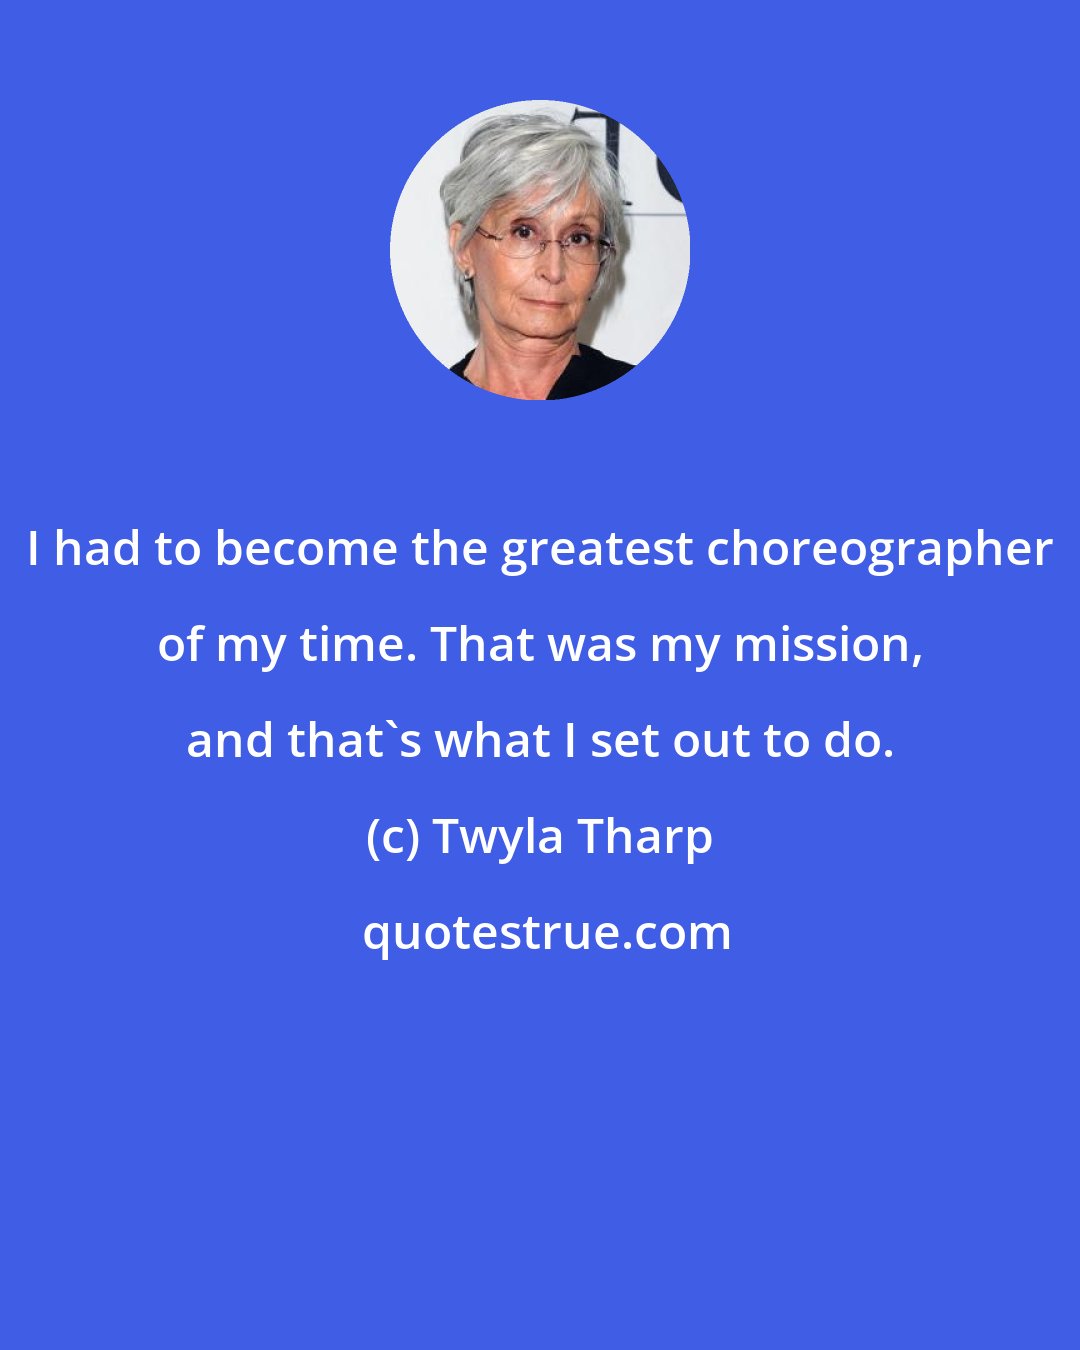 Twyla Tharp: I had to become the greatest choreographer of my time. That was my mission, and that's what I set out to do.